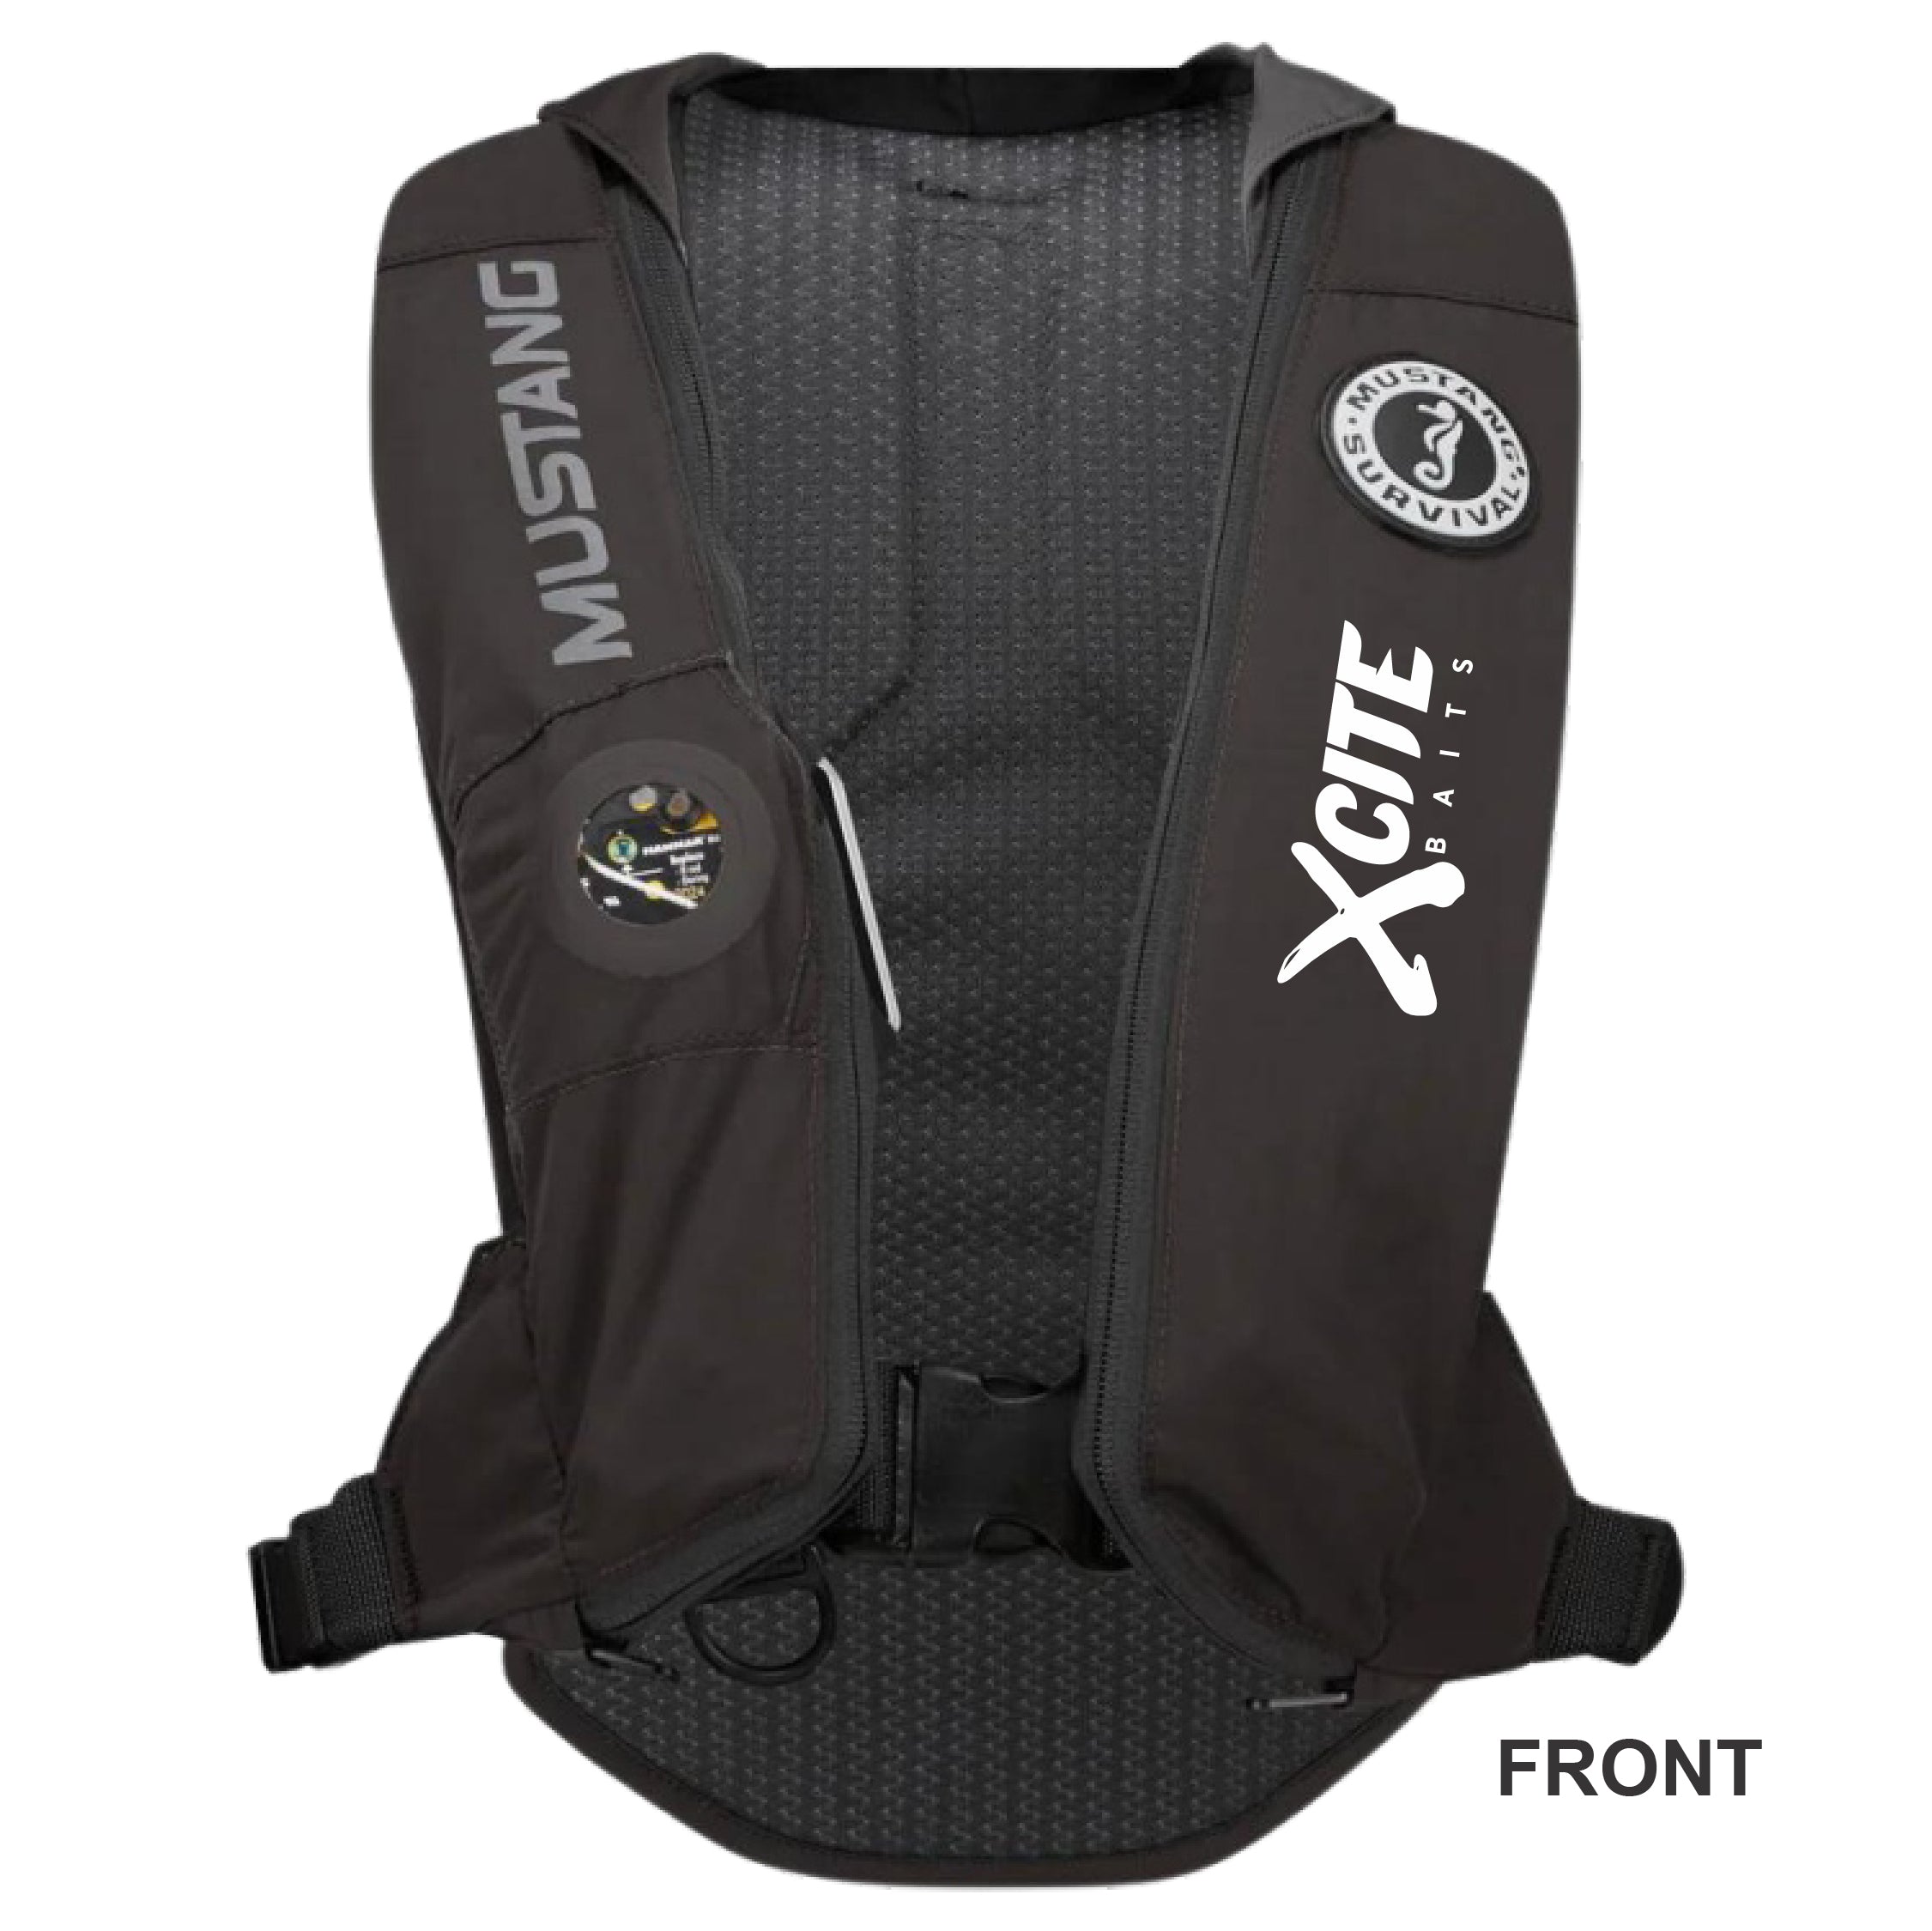 MUSTANG ELITE 28 HYDROSTATIC INFLATABLE PFD